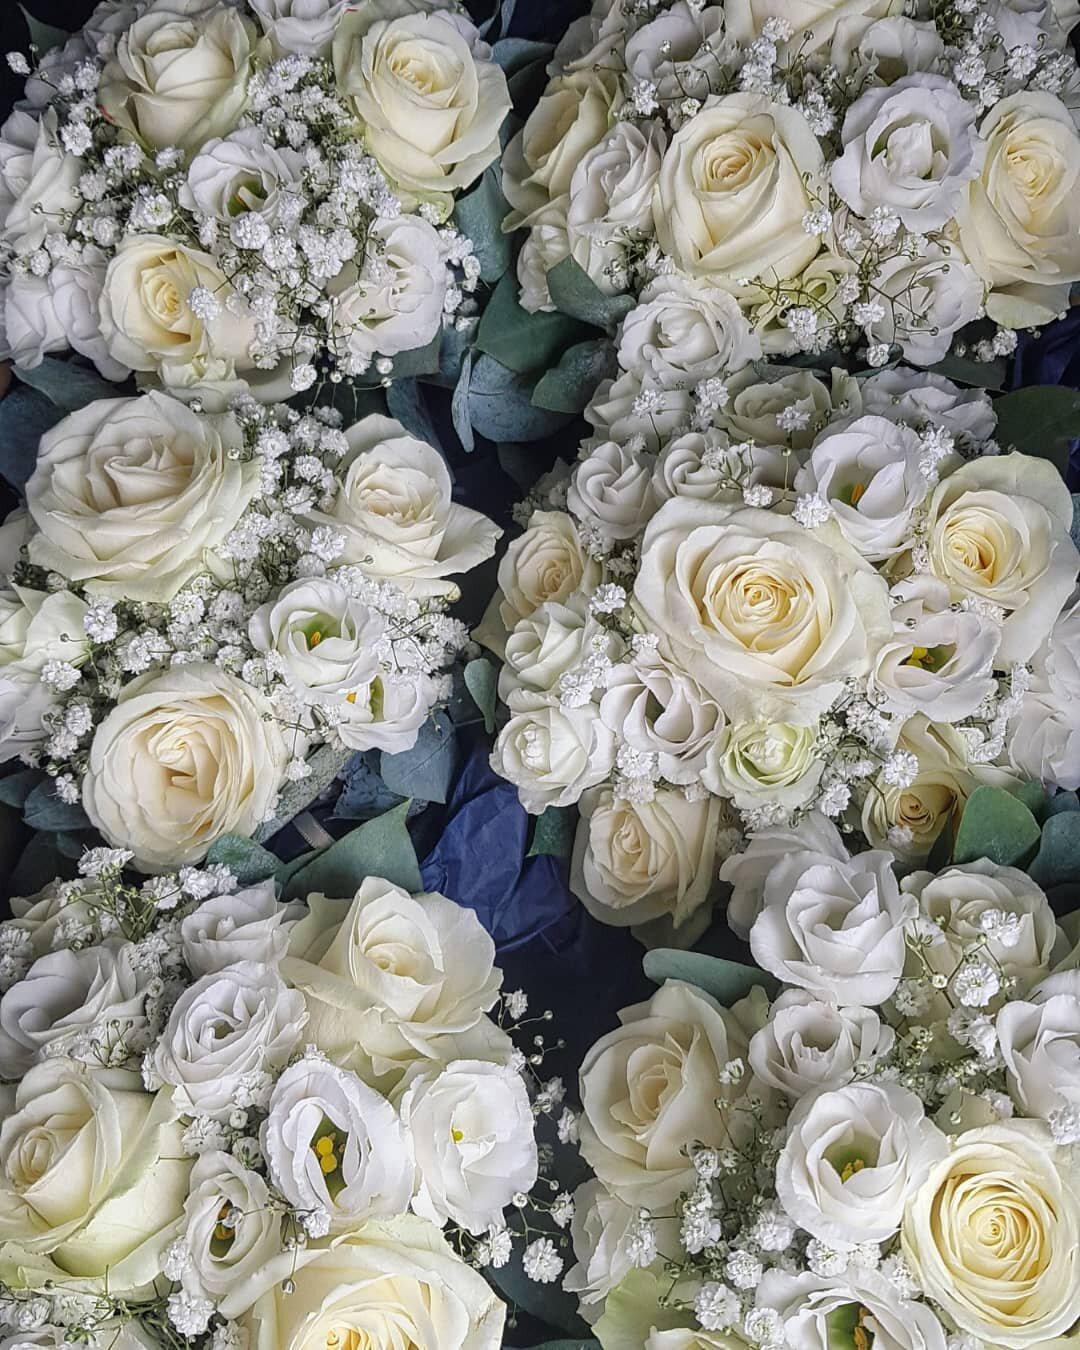 All whites 🌼

Six maids bouquets all in a row for Kirstys wedding at Ingliston yesterday!

We loved the fully white choice of flowers for the maids.

With Love, LB x. 

#scottishwedding #weddinginspo
#glasgowwestend
#glasgowflorist #bridesmaidflower